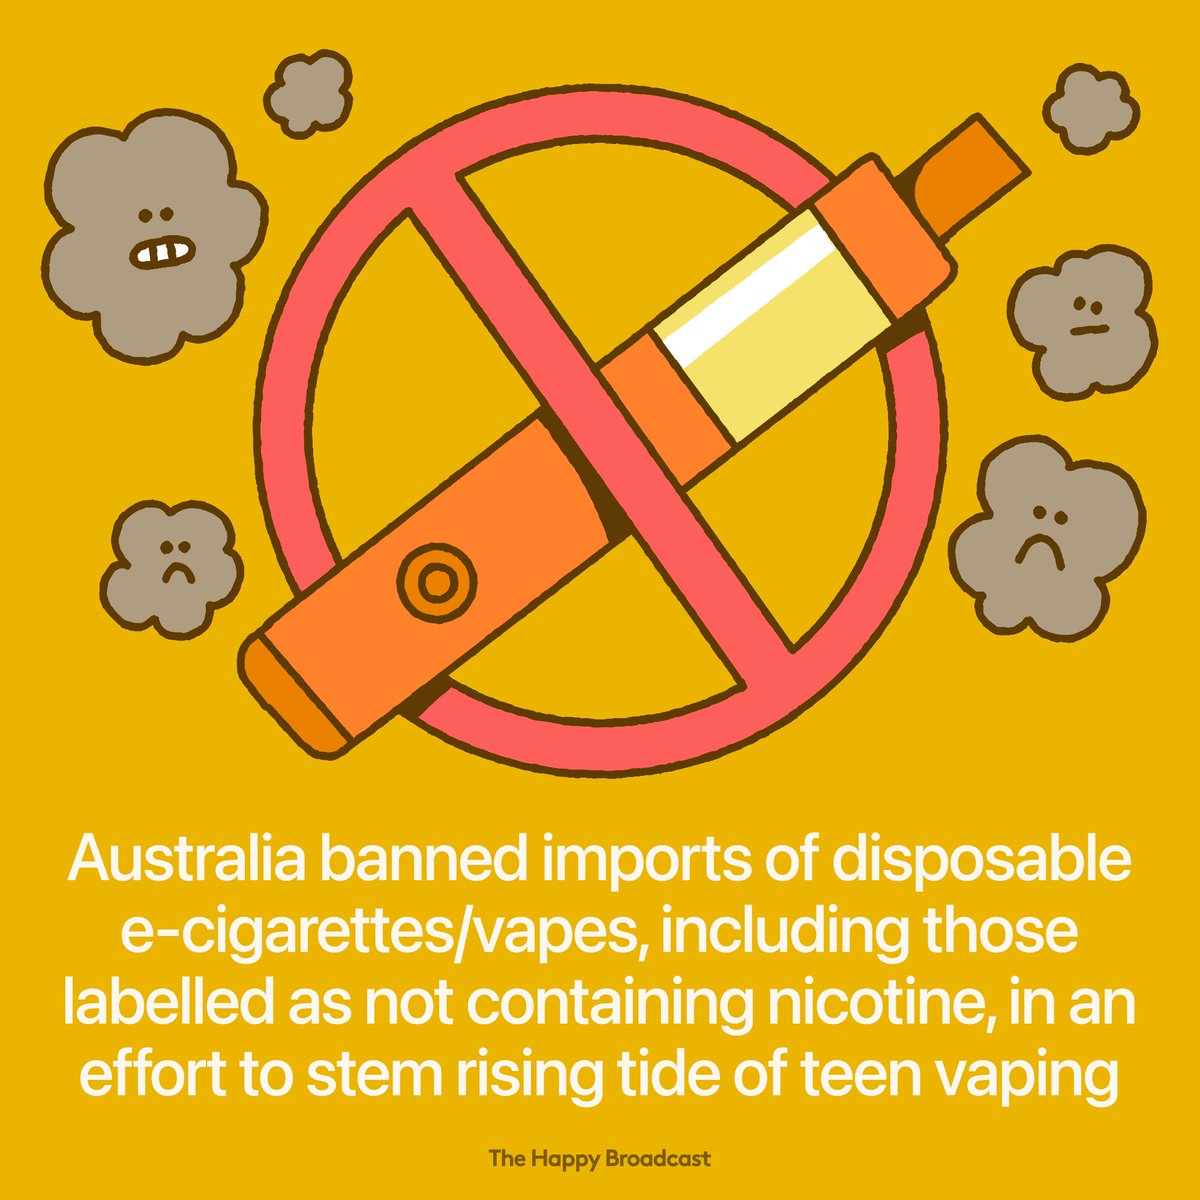 Young Australians who vape are about three times more likely to take up tobacco smoking. Read more: thehappybroadcast.com/news/australia… #vaping